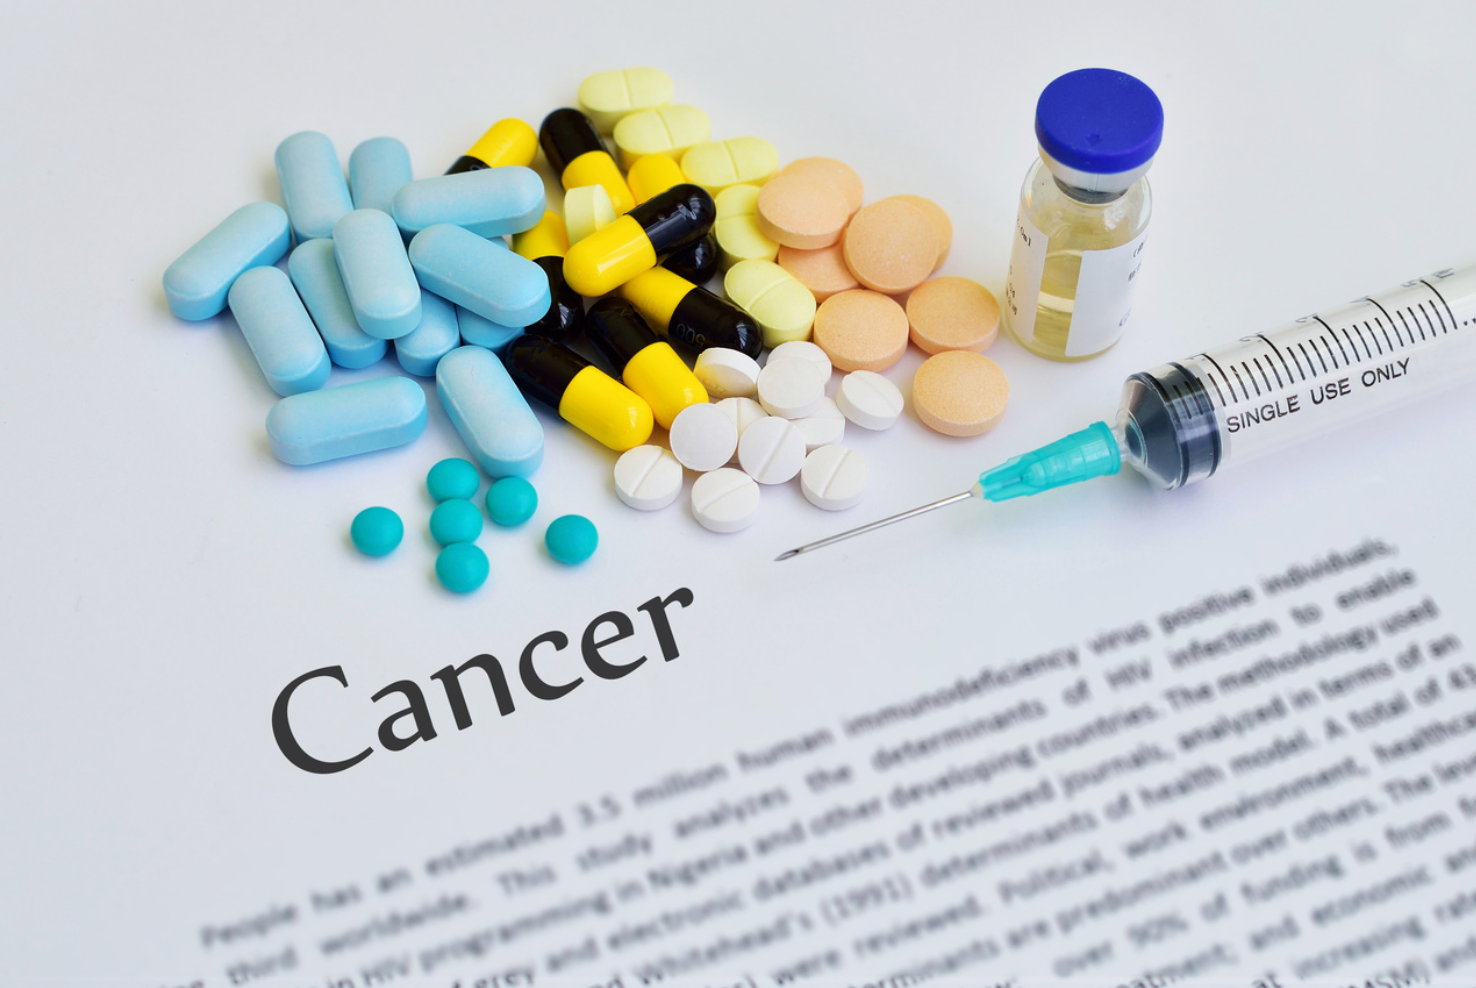 Durvalumab Improves Survival in Advanced Biliary Tract Cancer